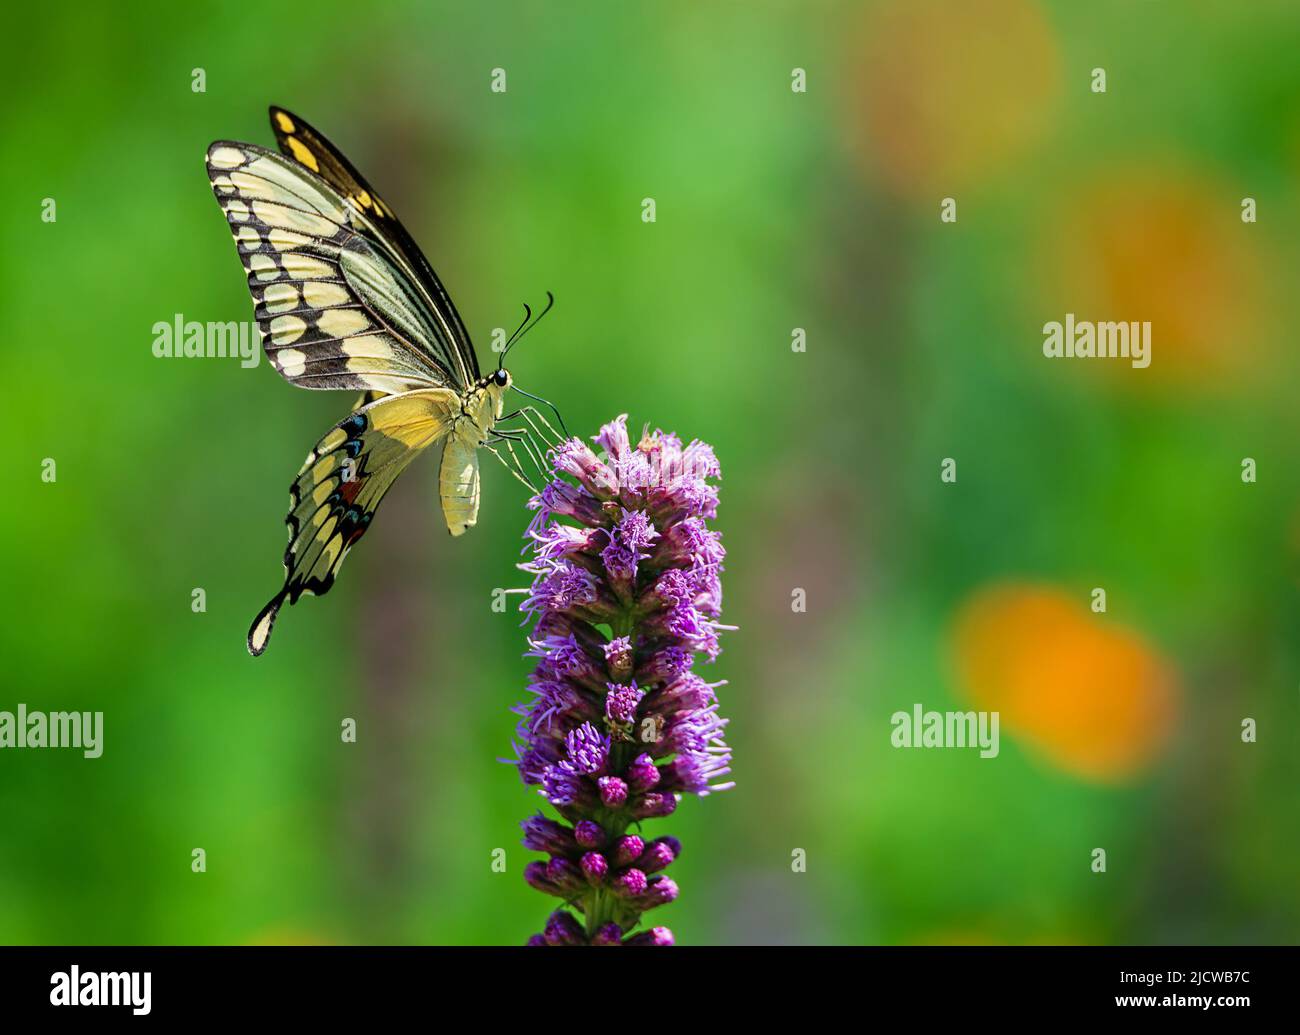 Giant swallowtail butterfly (Papilio cresphontes) feeding on purple Gayfeather flower in the garden. Natural green background with copy space. Stock Photo